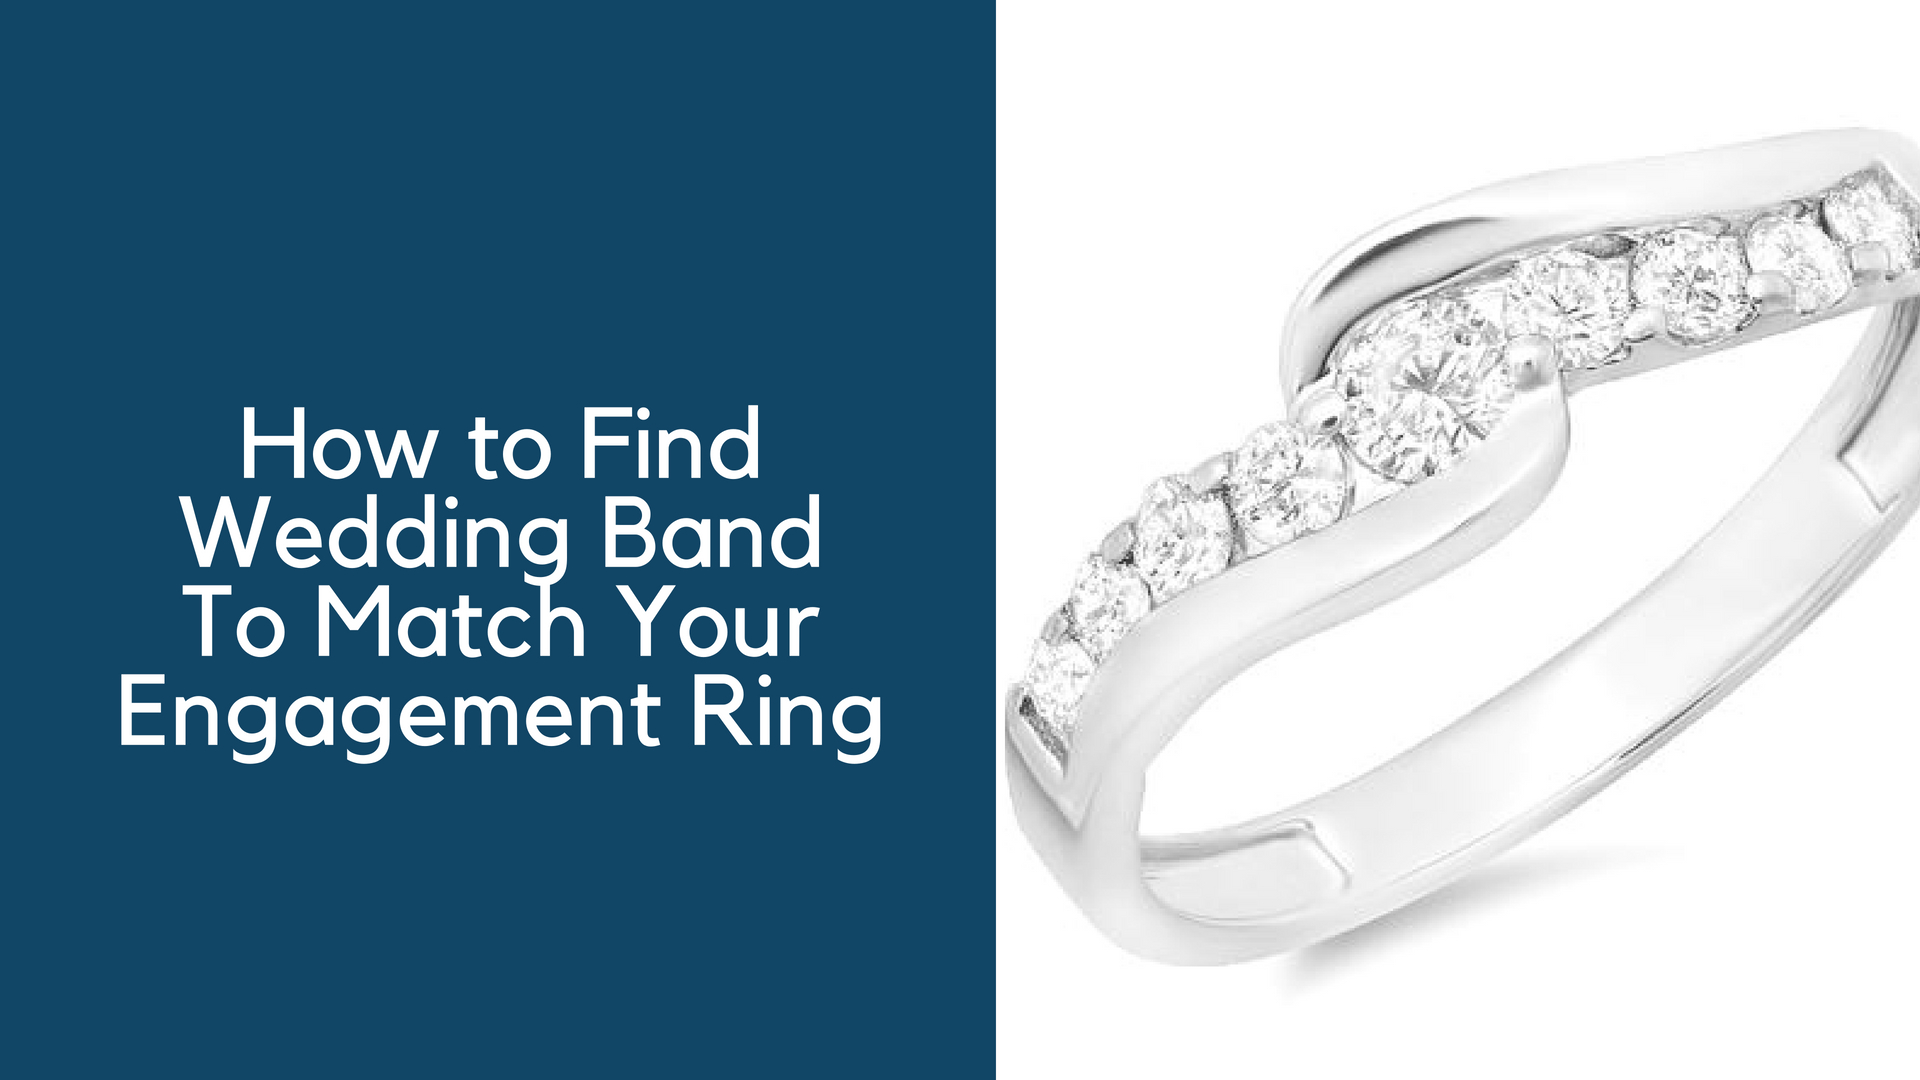 How to Find Wedding Band to Match Your Engagement Ring